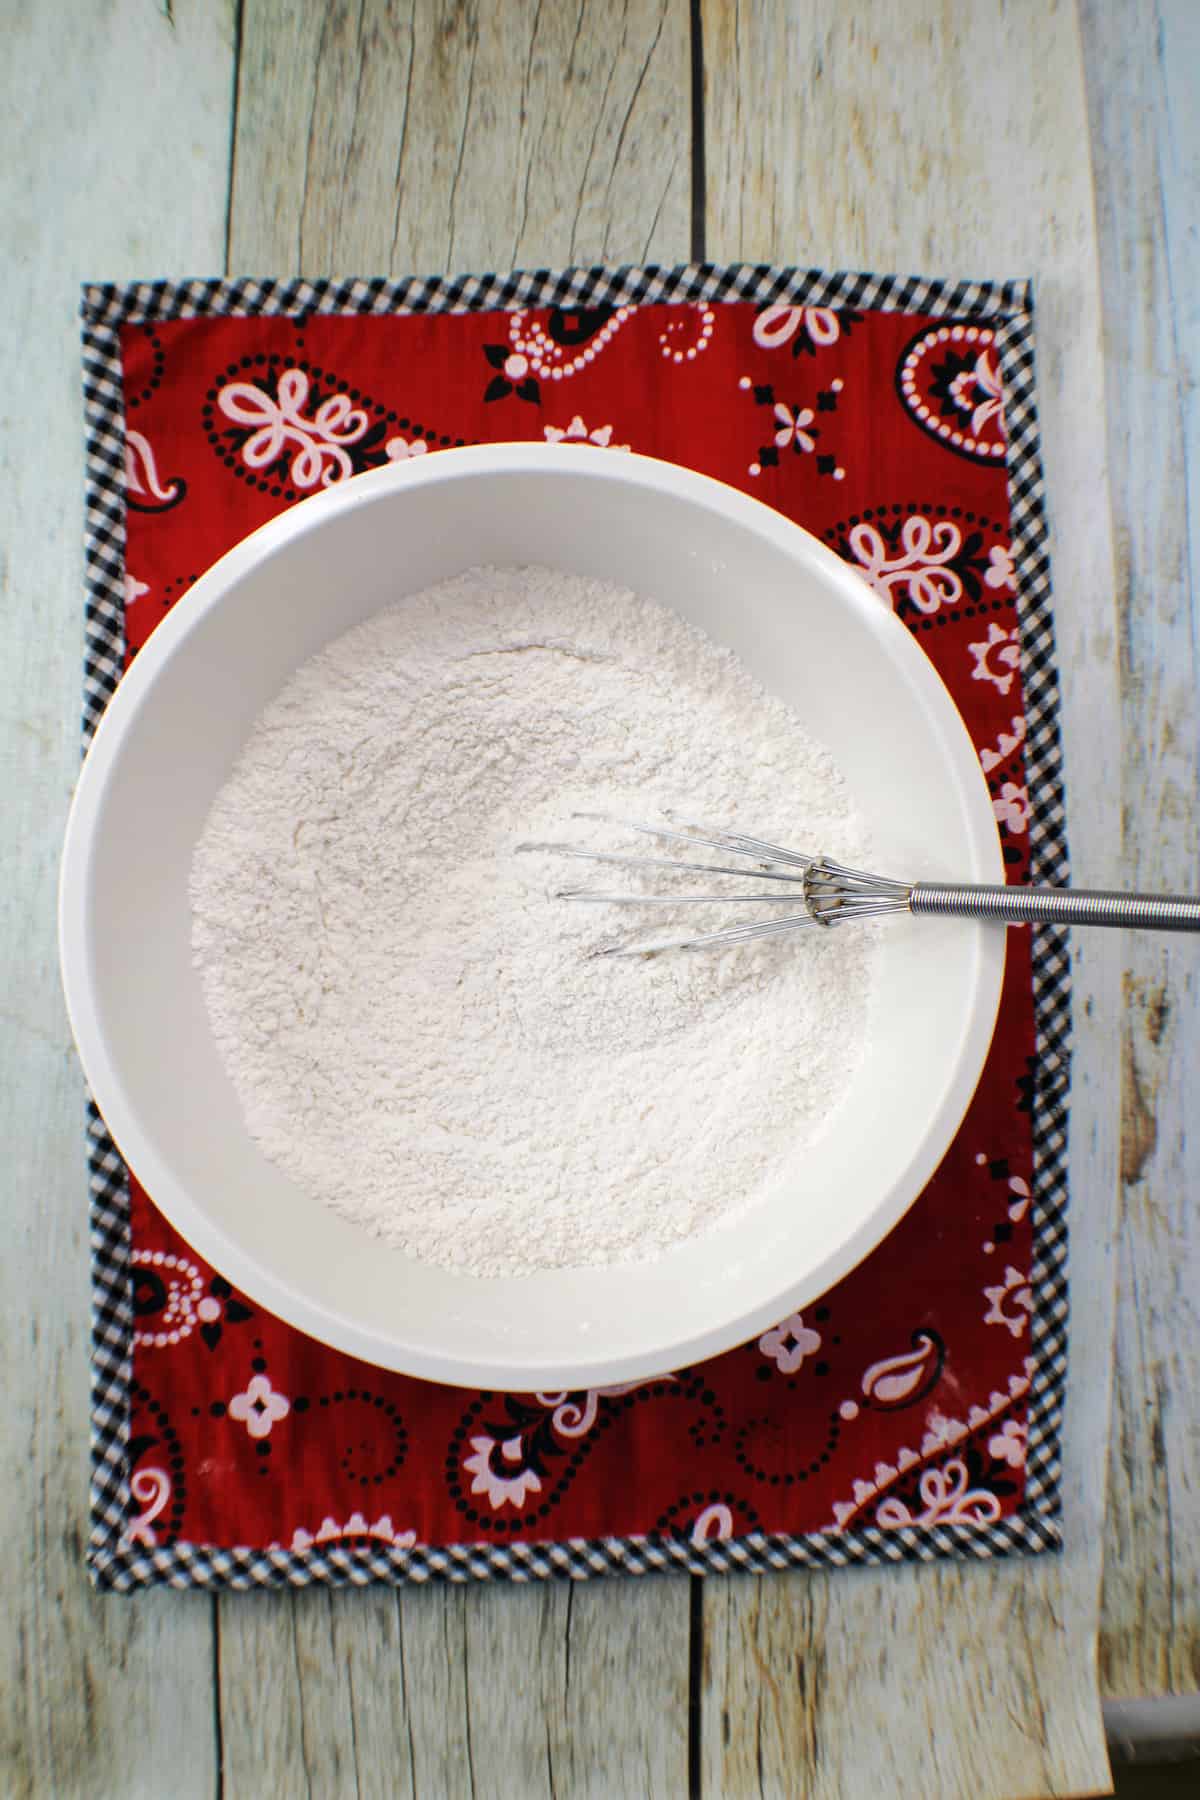 Dry cake ingredients in a bowl on a red kerchief on a wood table.